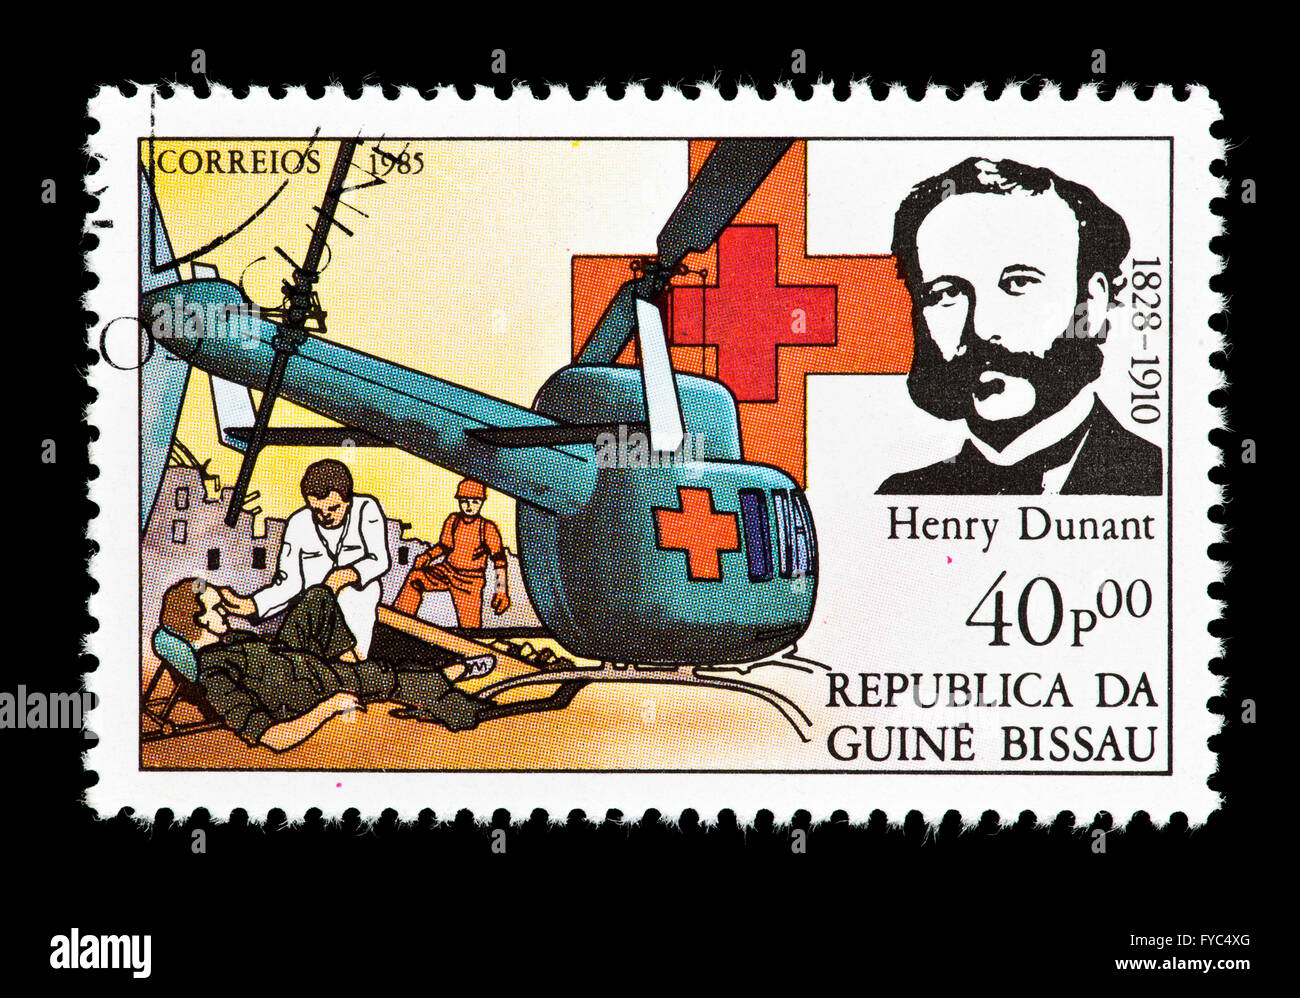 Postage stamp from Guinea Bissau depicting Henry Dunant, founder of the International Red Cross. Stock Photo